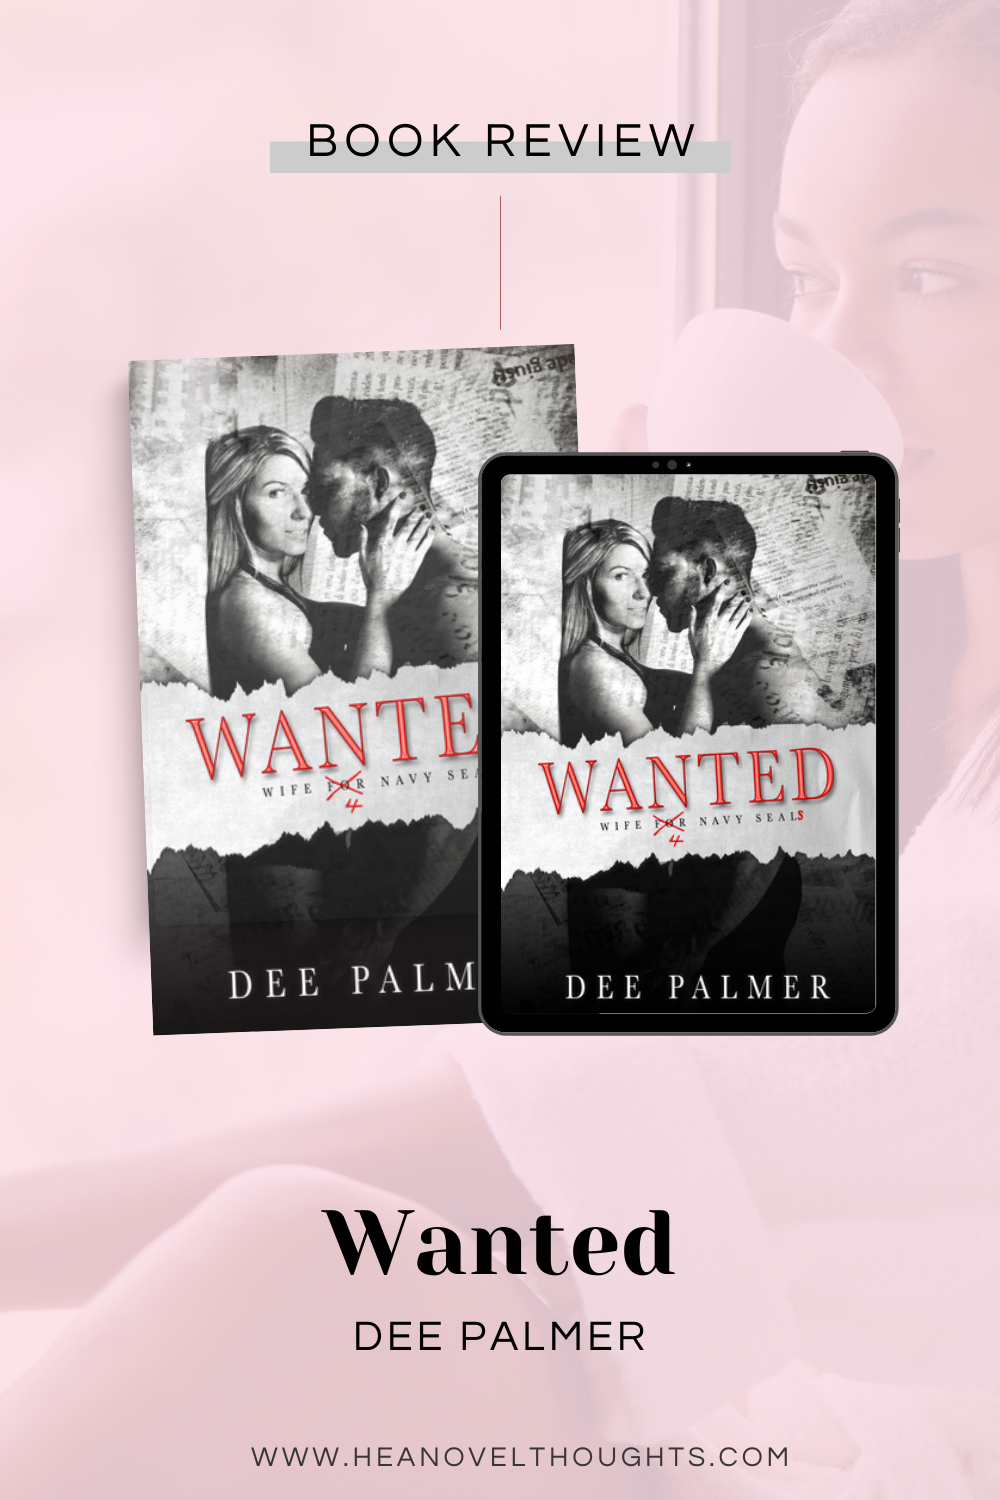 Wanted by Dee Palmer